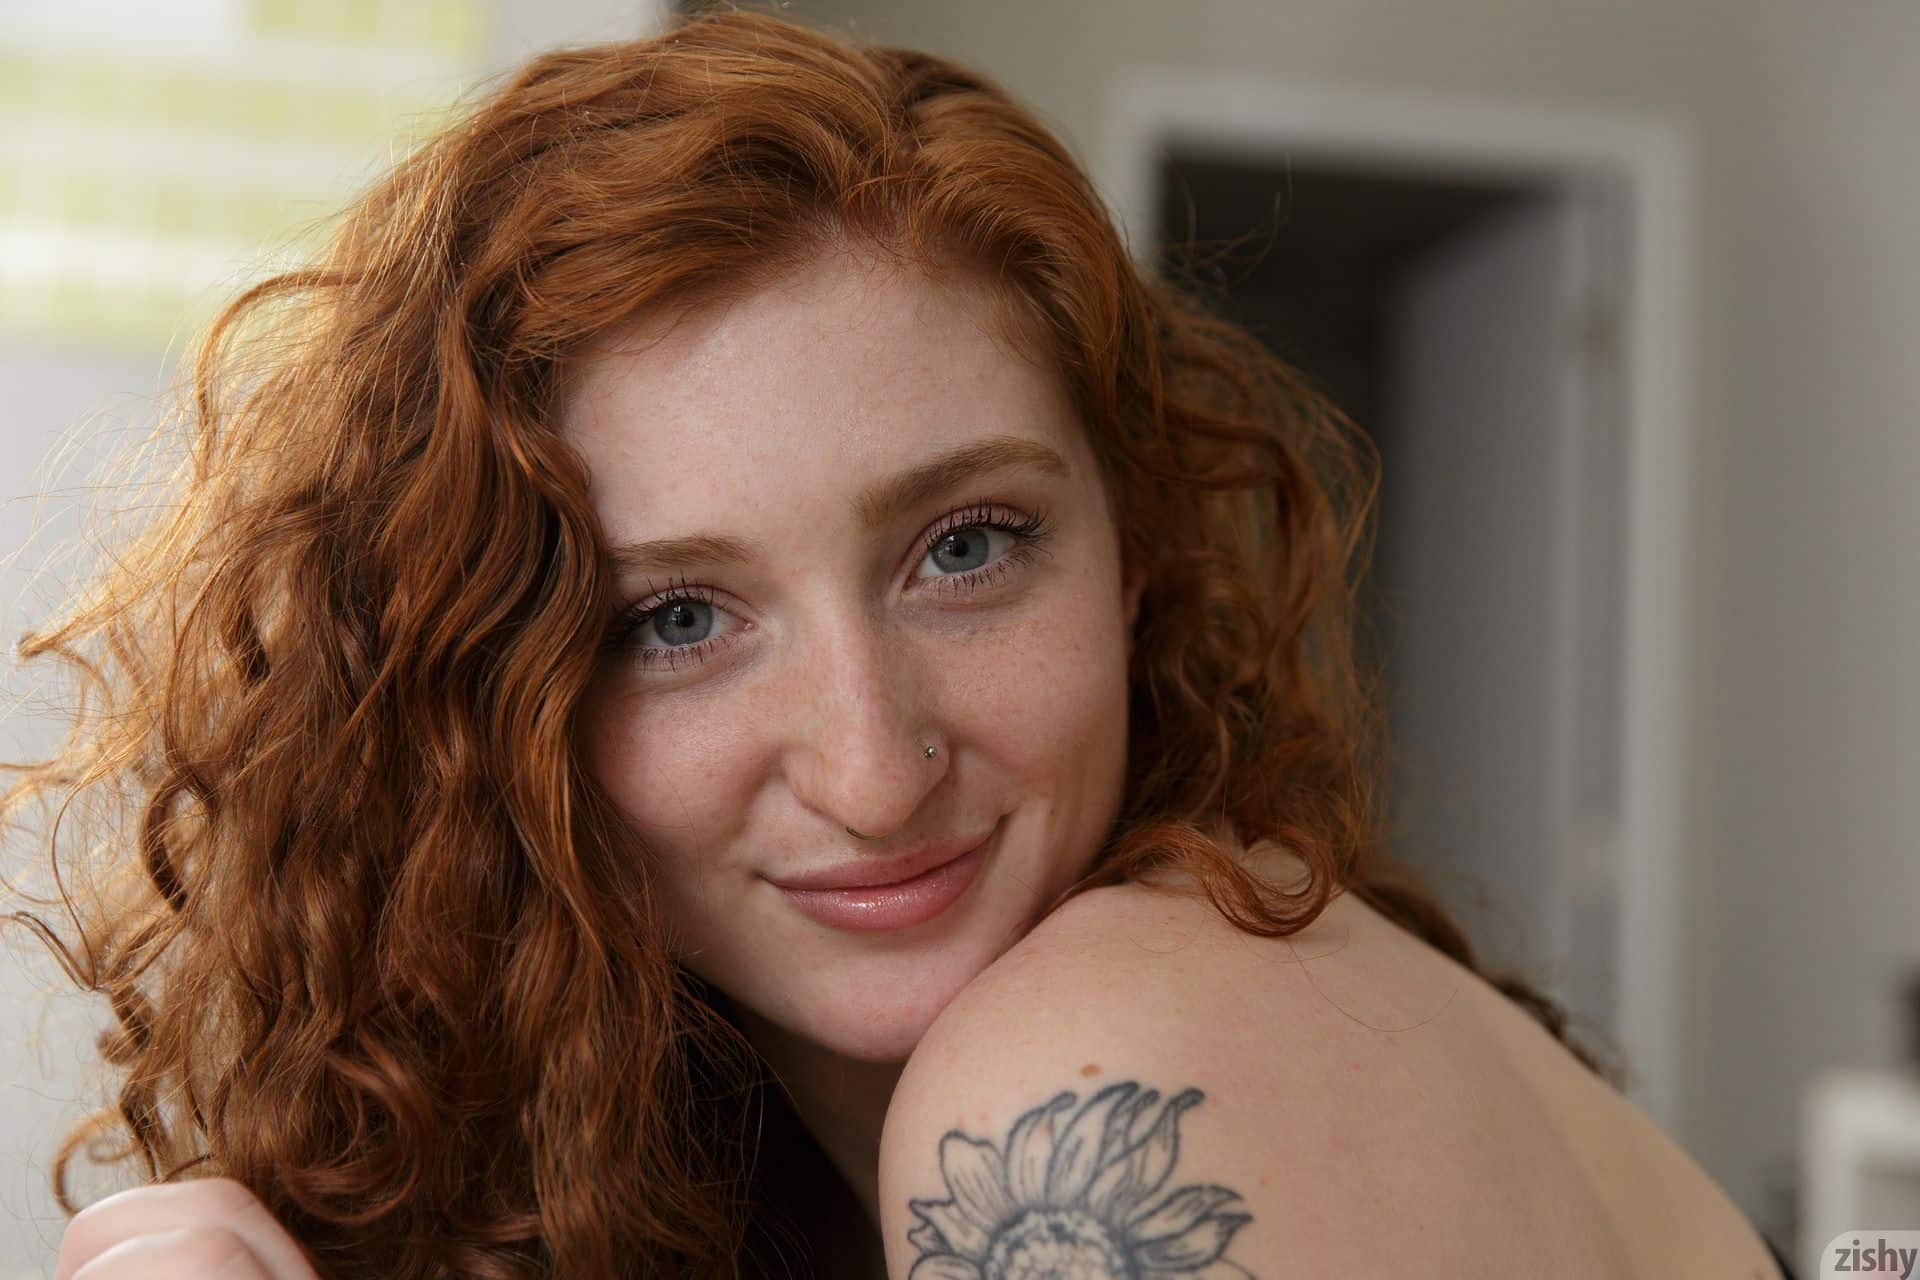 Closeup of freckled redhead Corsen Gilroy and her shoulder tattoo